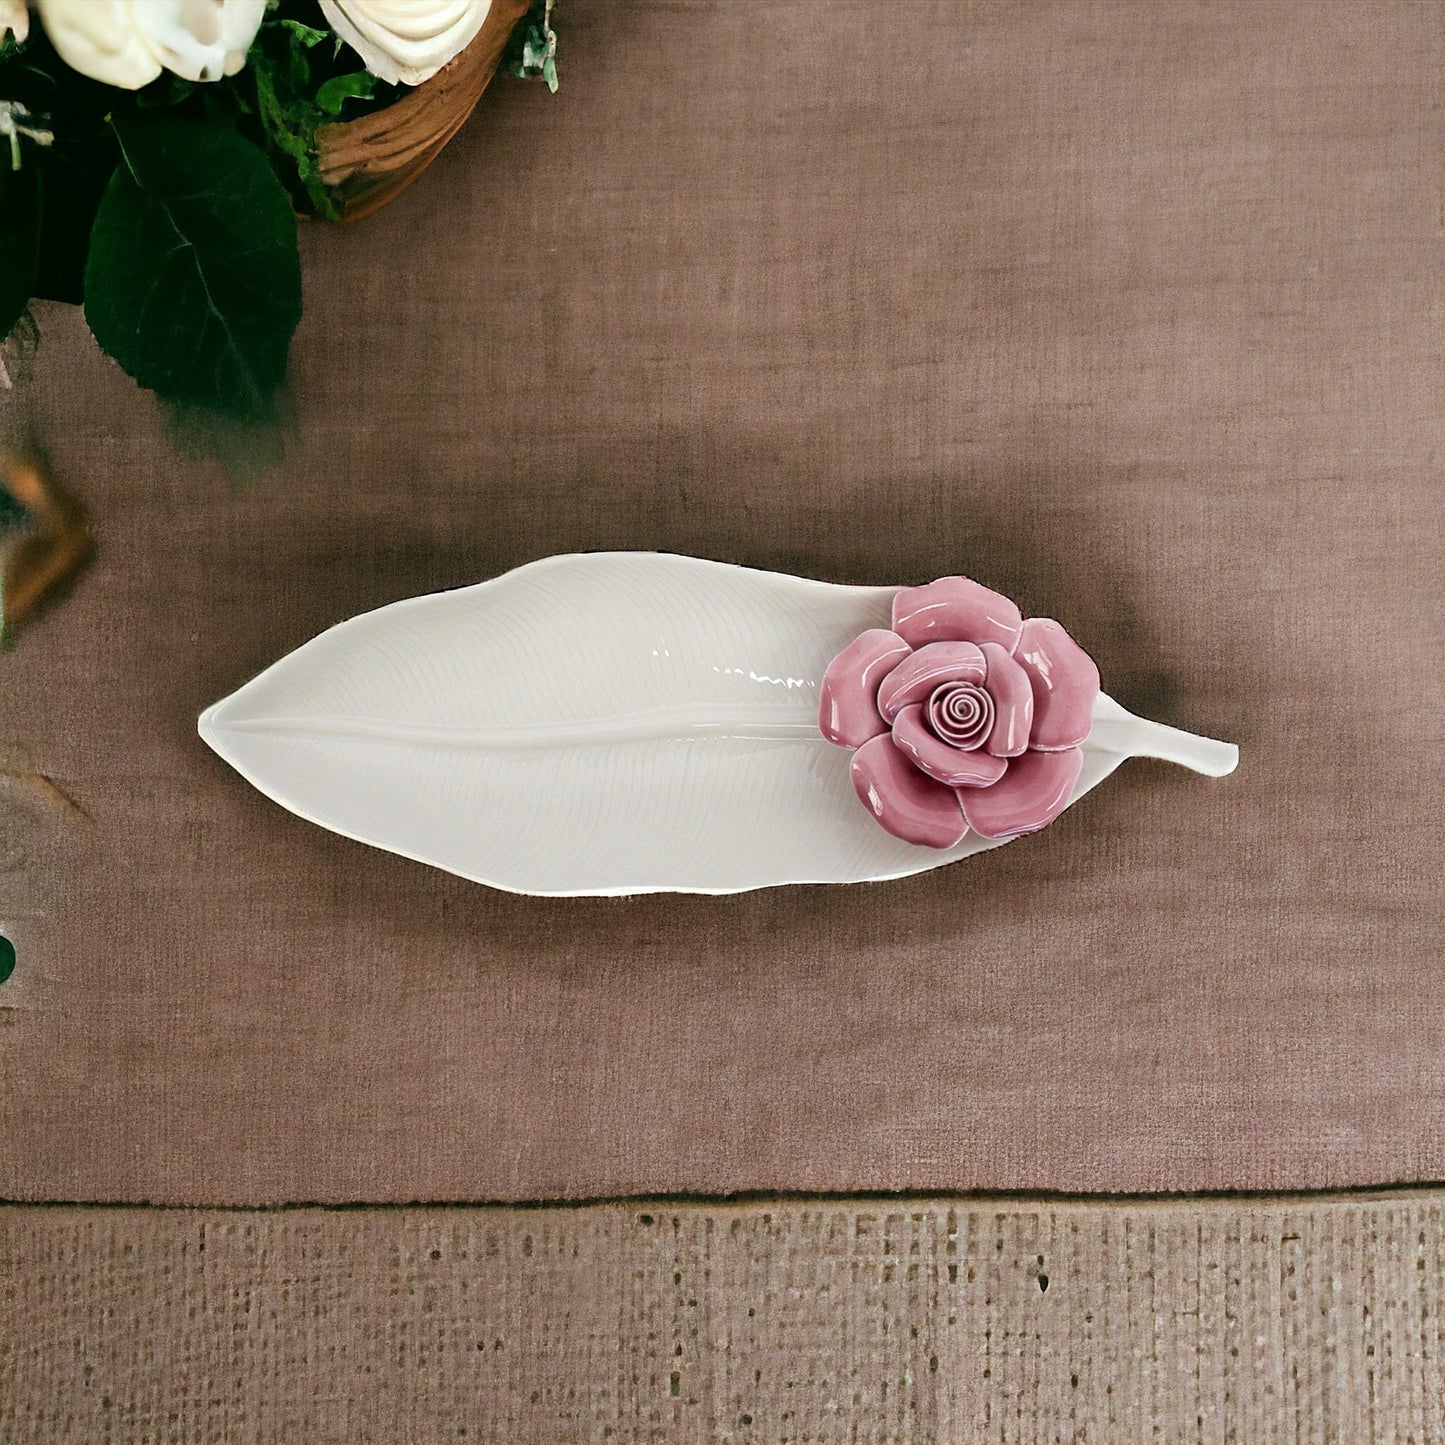 Plate Tray White Leaf Flower - The Renmy Store Homewares & Gifts 